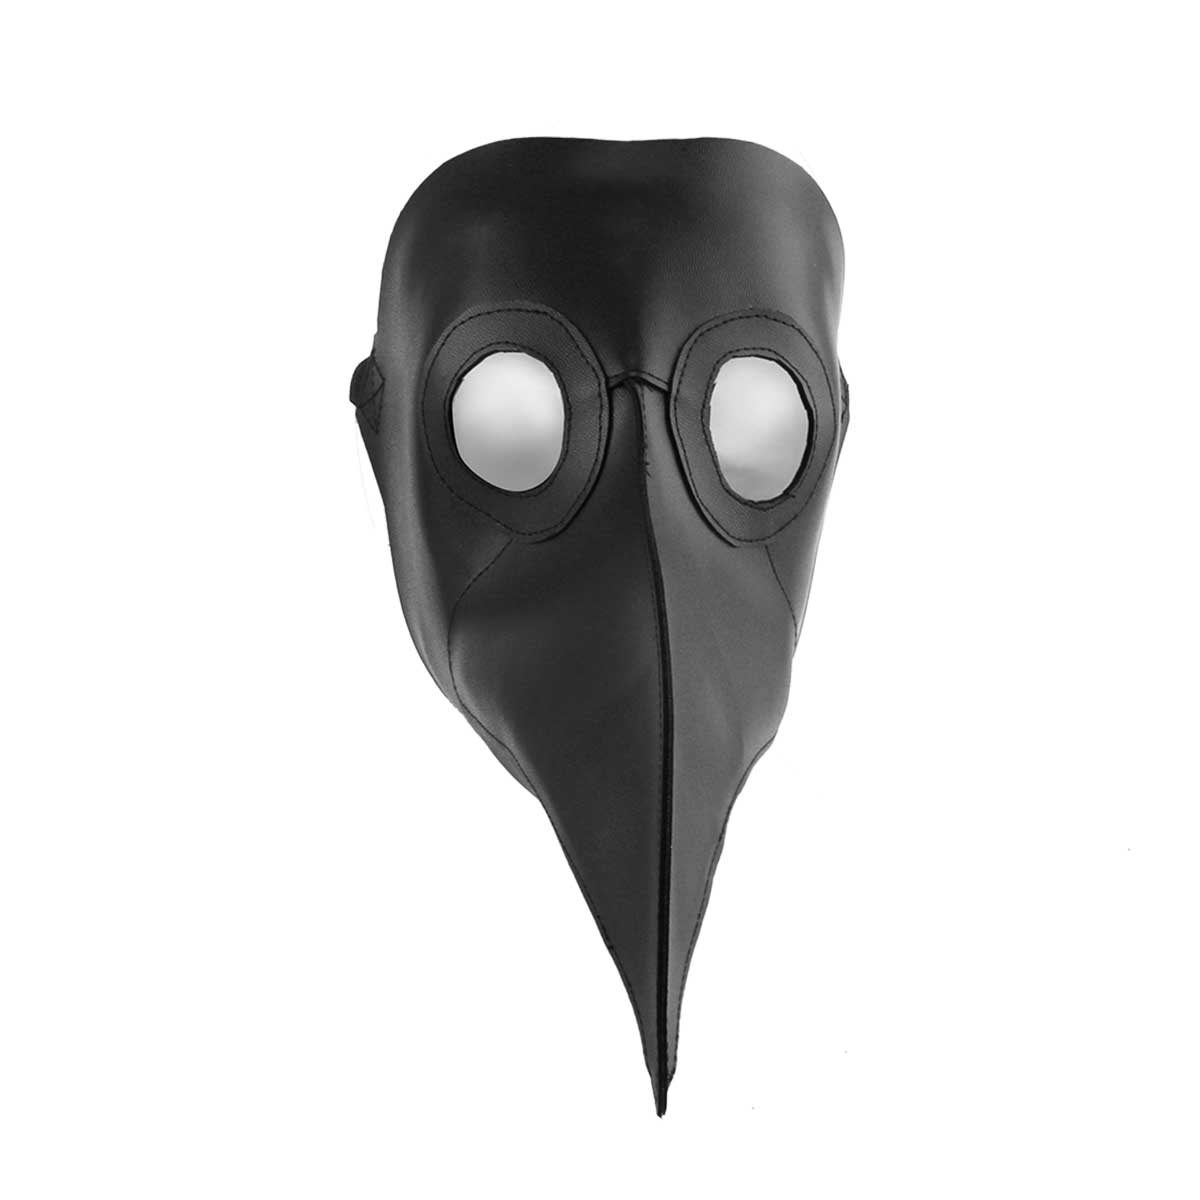 Cospaly Dr. Beulenpest Steampunk Plague Doctor Mask Brown PU Leather Birds Beak Masks